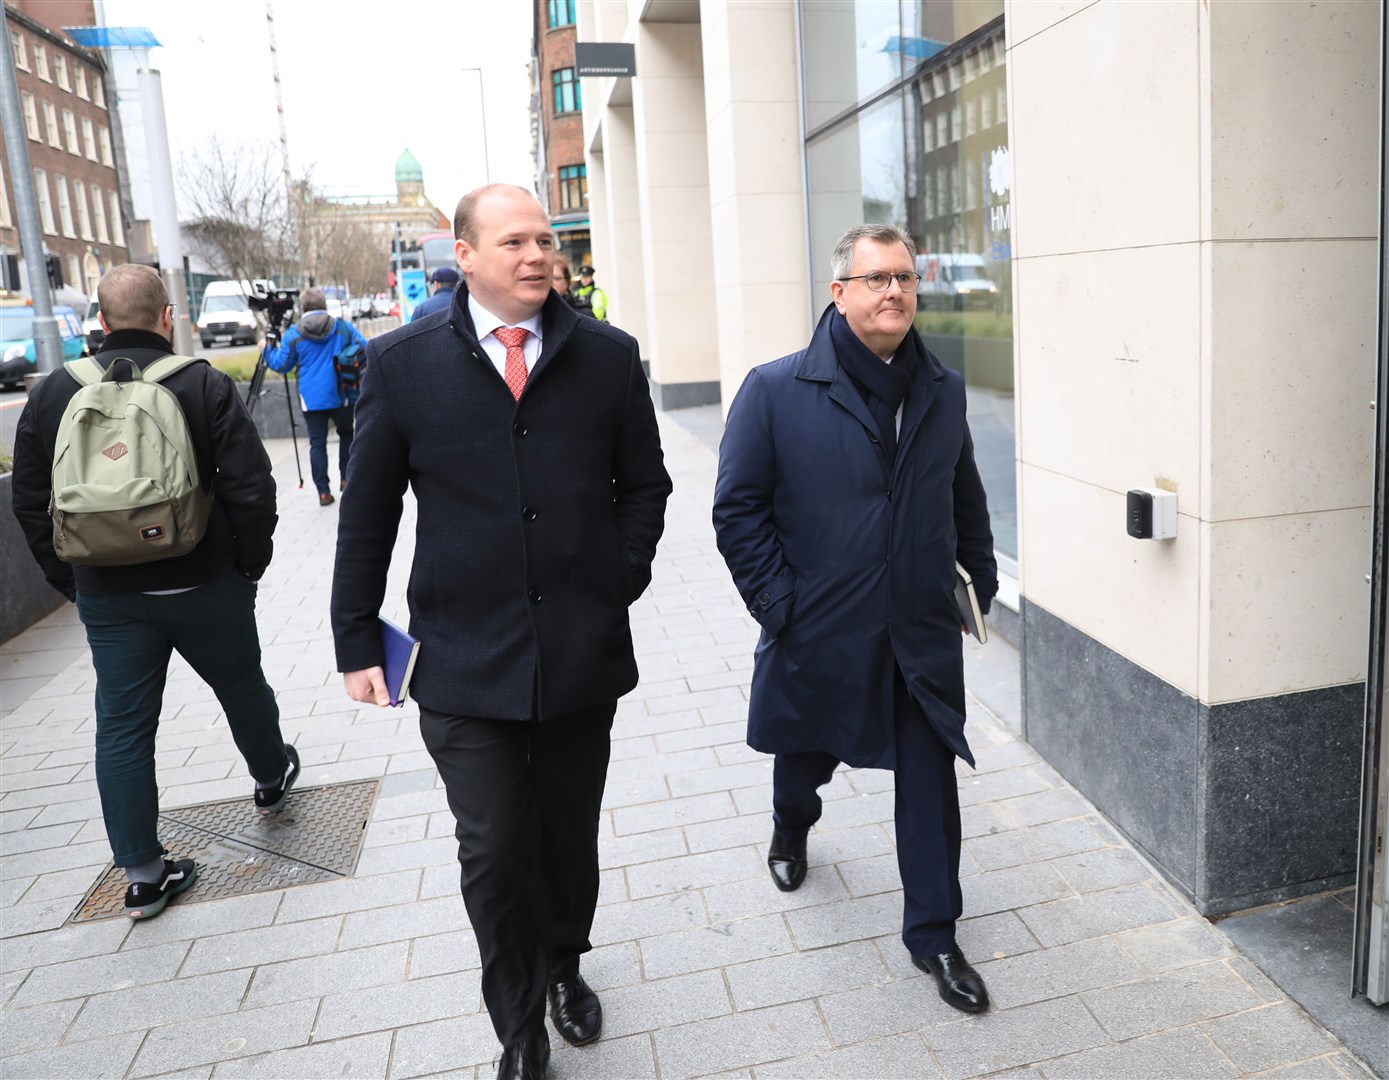 DUP leader Sir Jeffrey Donaldson, right, in Belfast for talks with Foreign Secretary James Cleverly, Northern Ireland Secretary Chris Heaton-Harris and other political party members on Wednesday (Peter Morrison/PA)